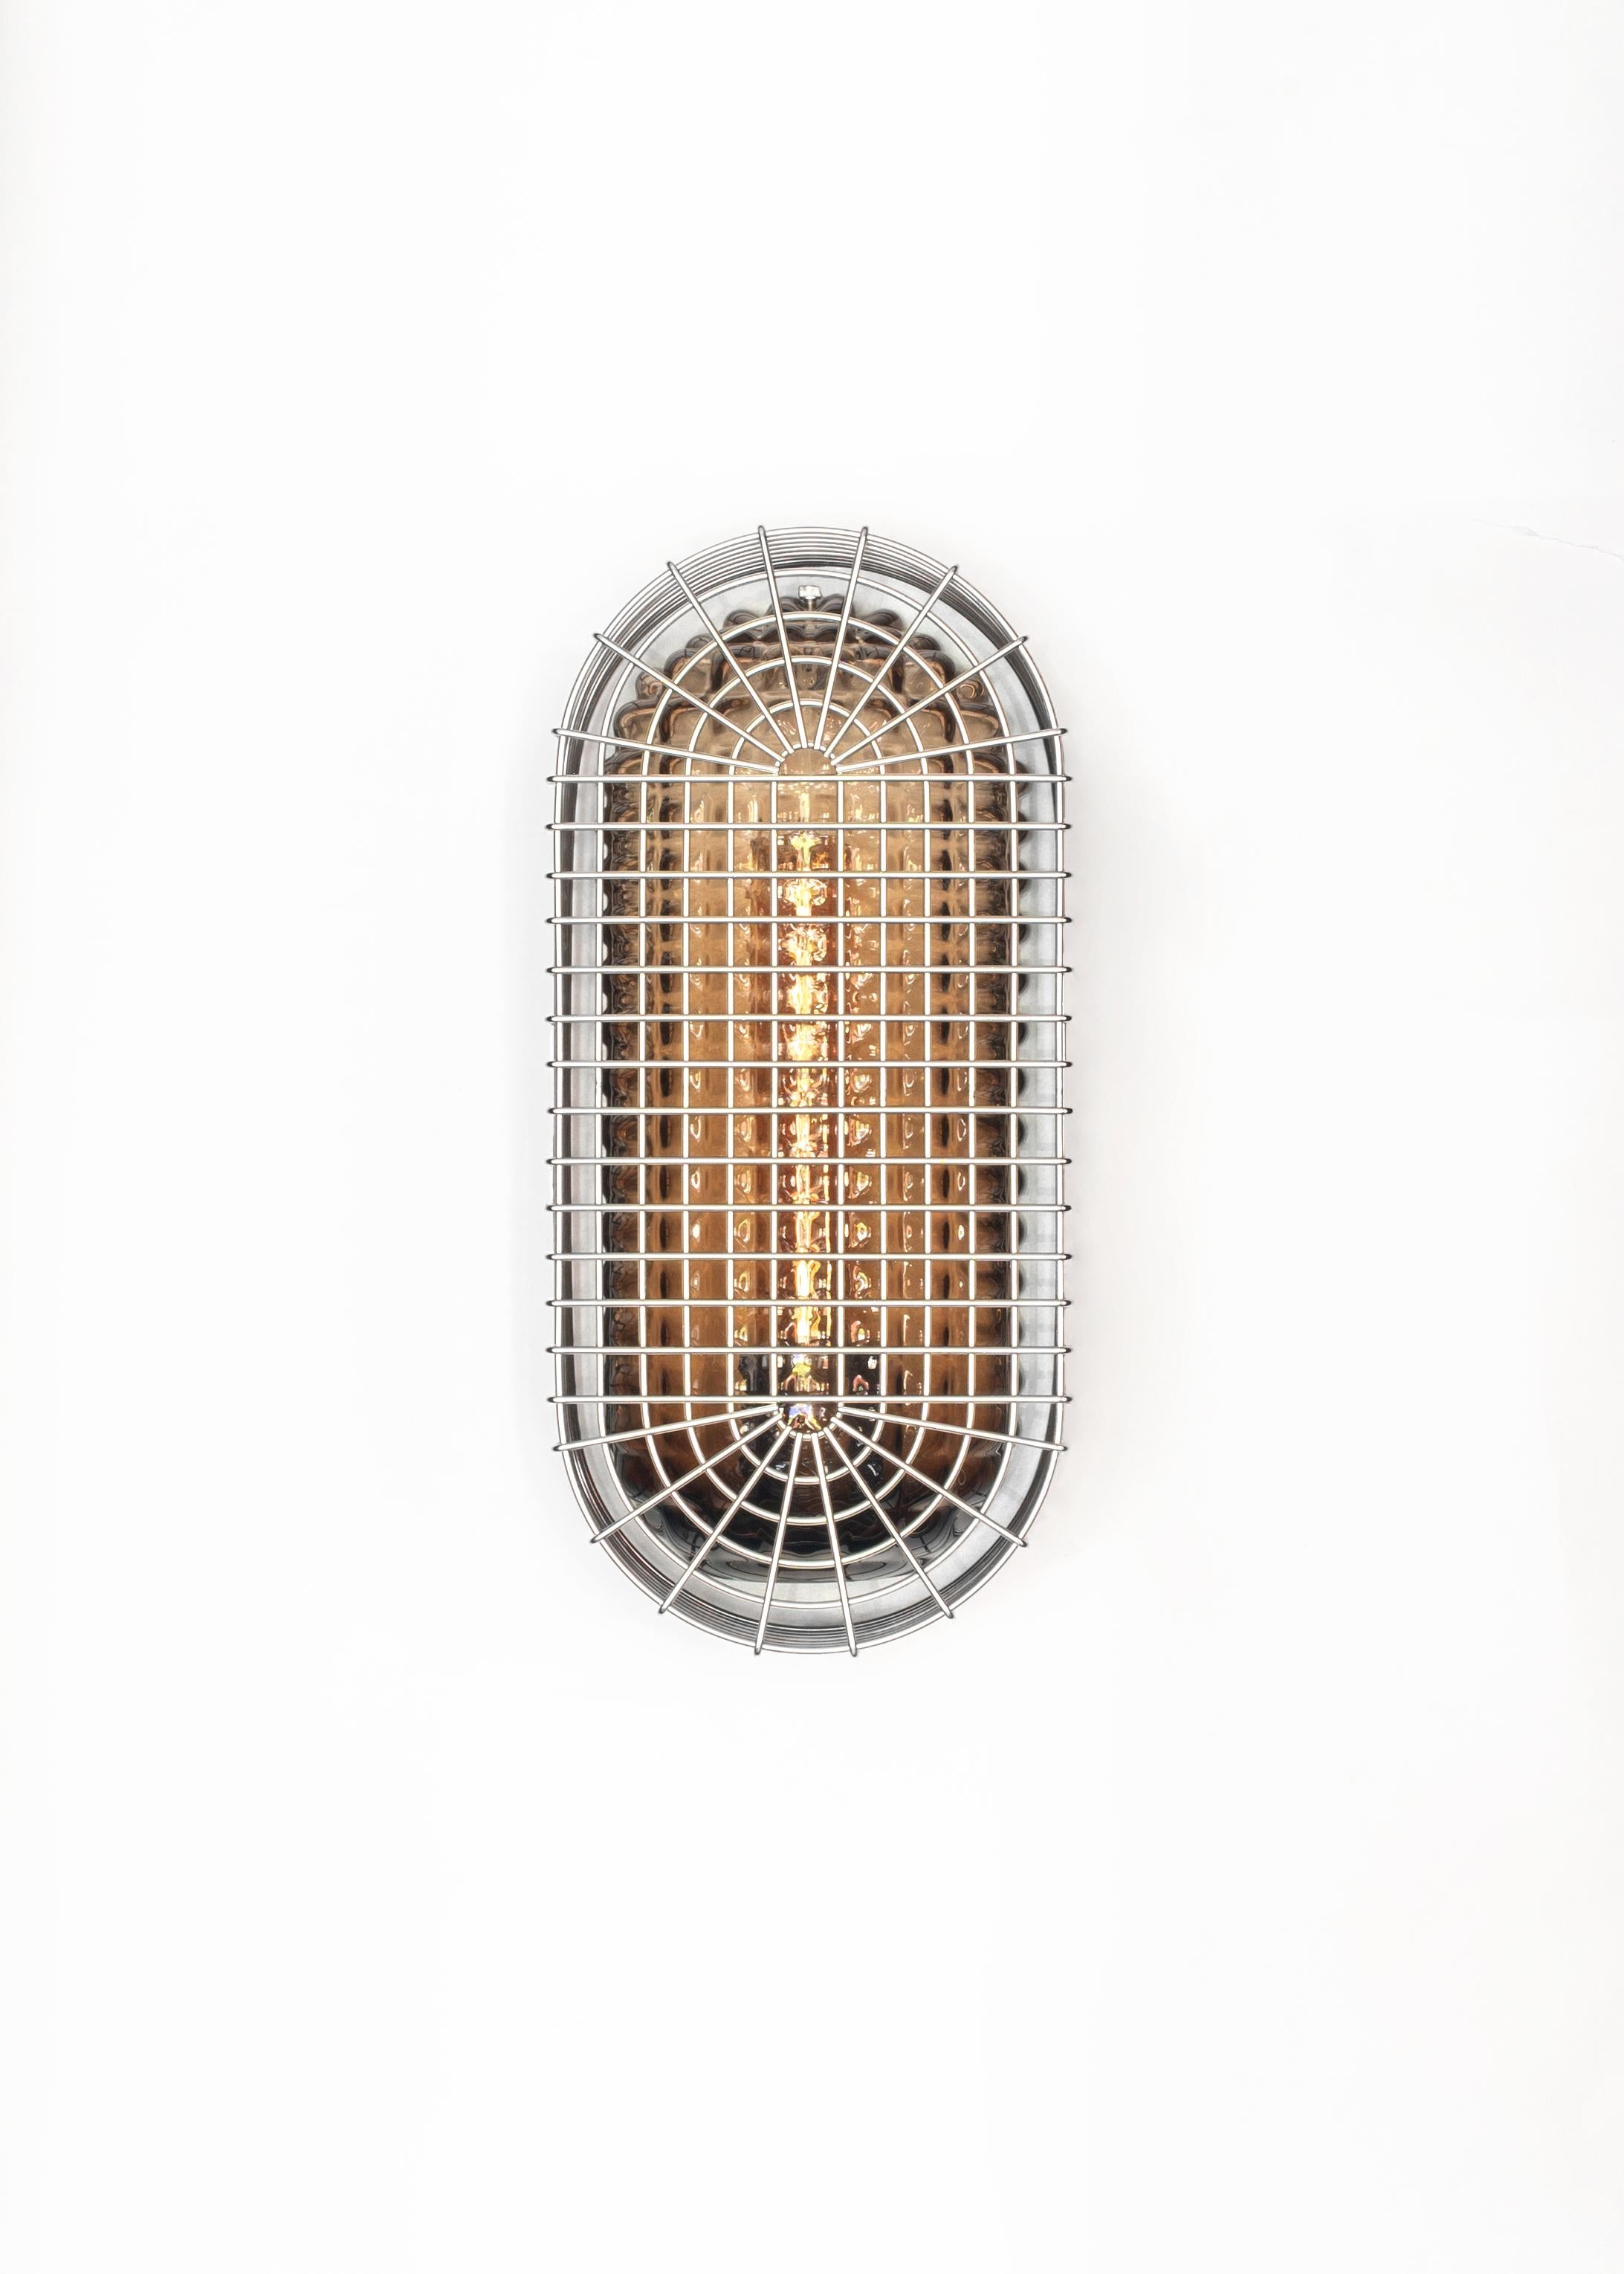 With restraint comes anticipated pleasure. Such is the philosophy behind our Chastity Sconces. Rippled glass lies underneath a cage of stainless steel to juxtapose sinuousness and rigidity. The glow of the underlying light accentuates the layering